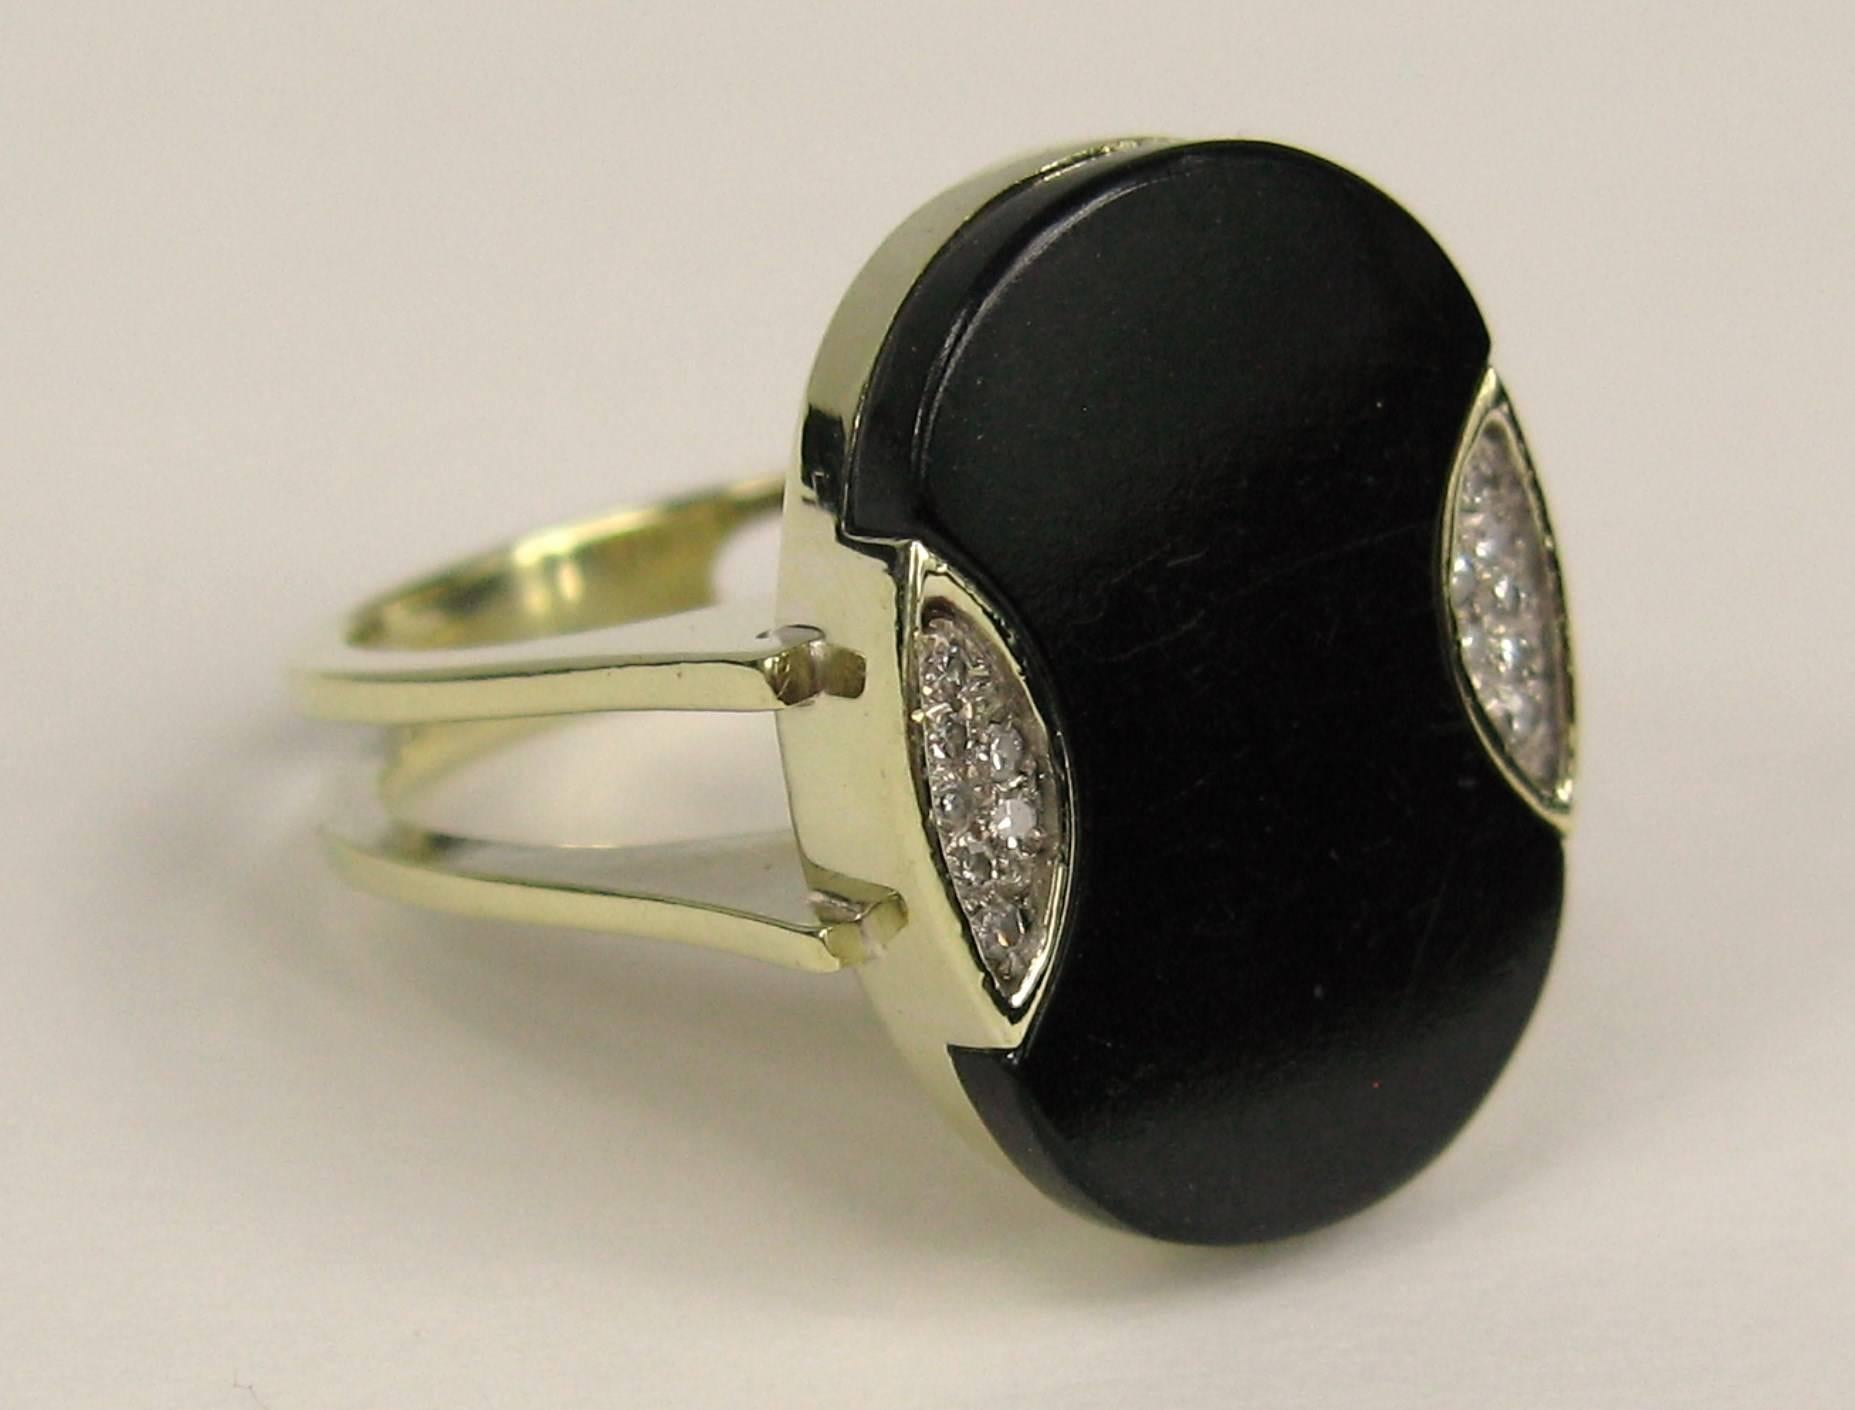 Another stunning Modernist 14k Gold Ring. Featuring an Oval Onyx Stone with small diamond accents embedded on each side of the onyx. The ring is a size 7 and can be sized up or down by us or your jeweler. Top of the ring measures .83 in top to